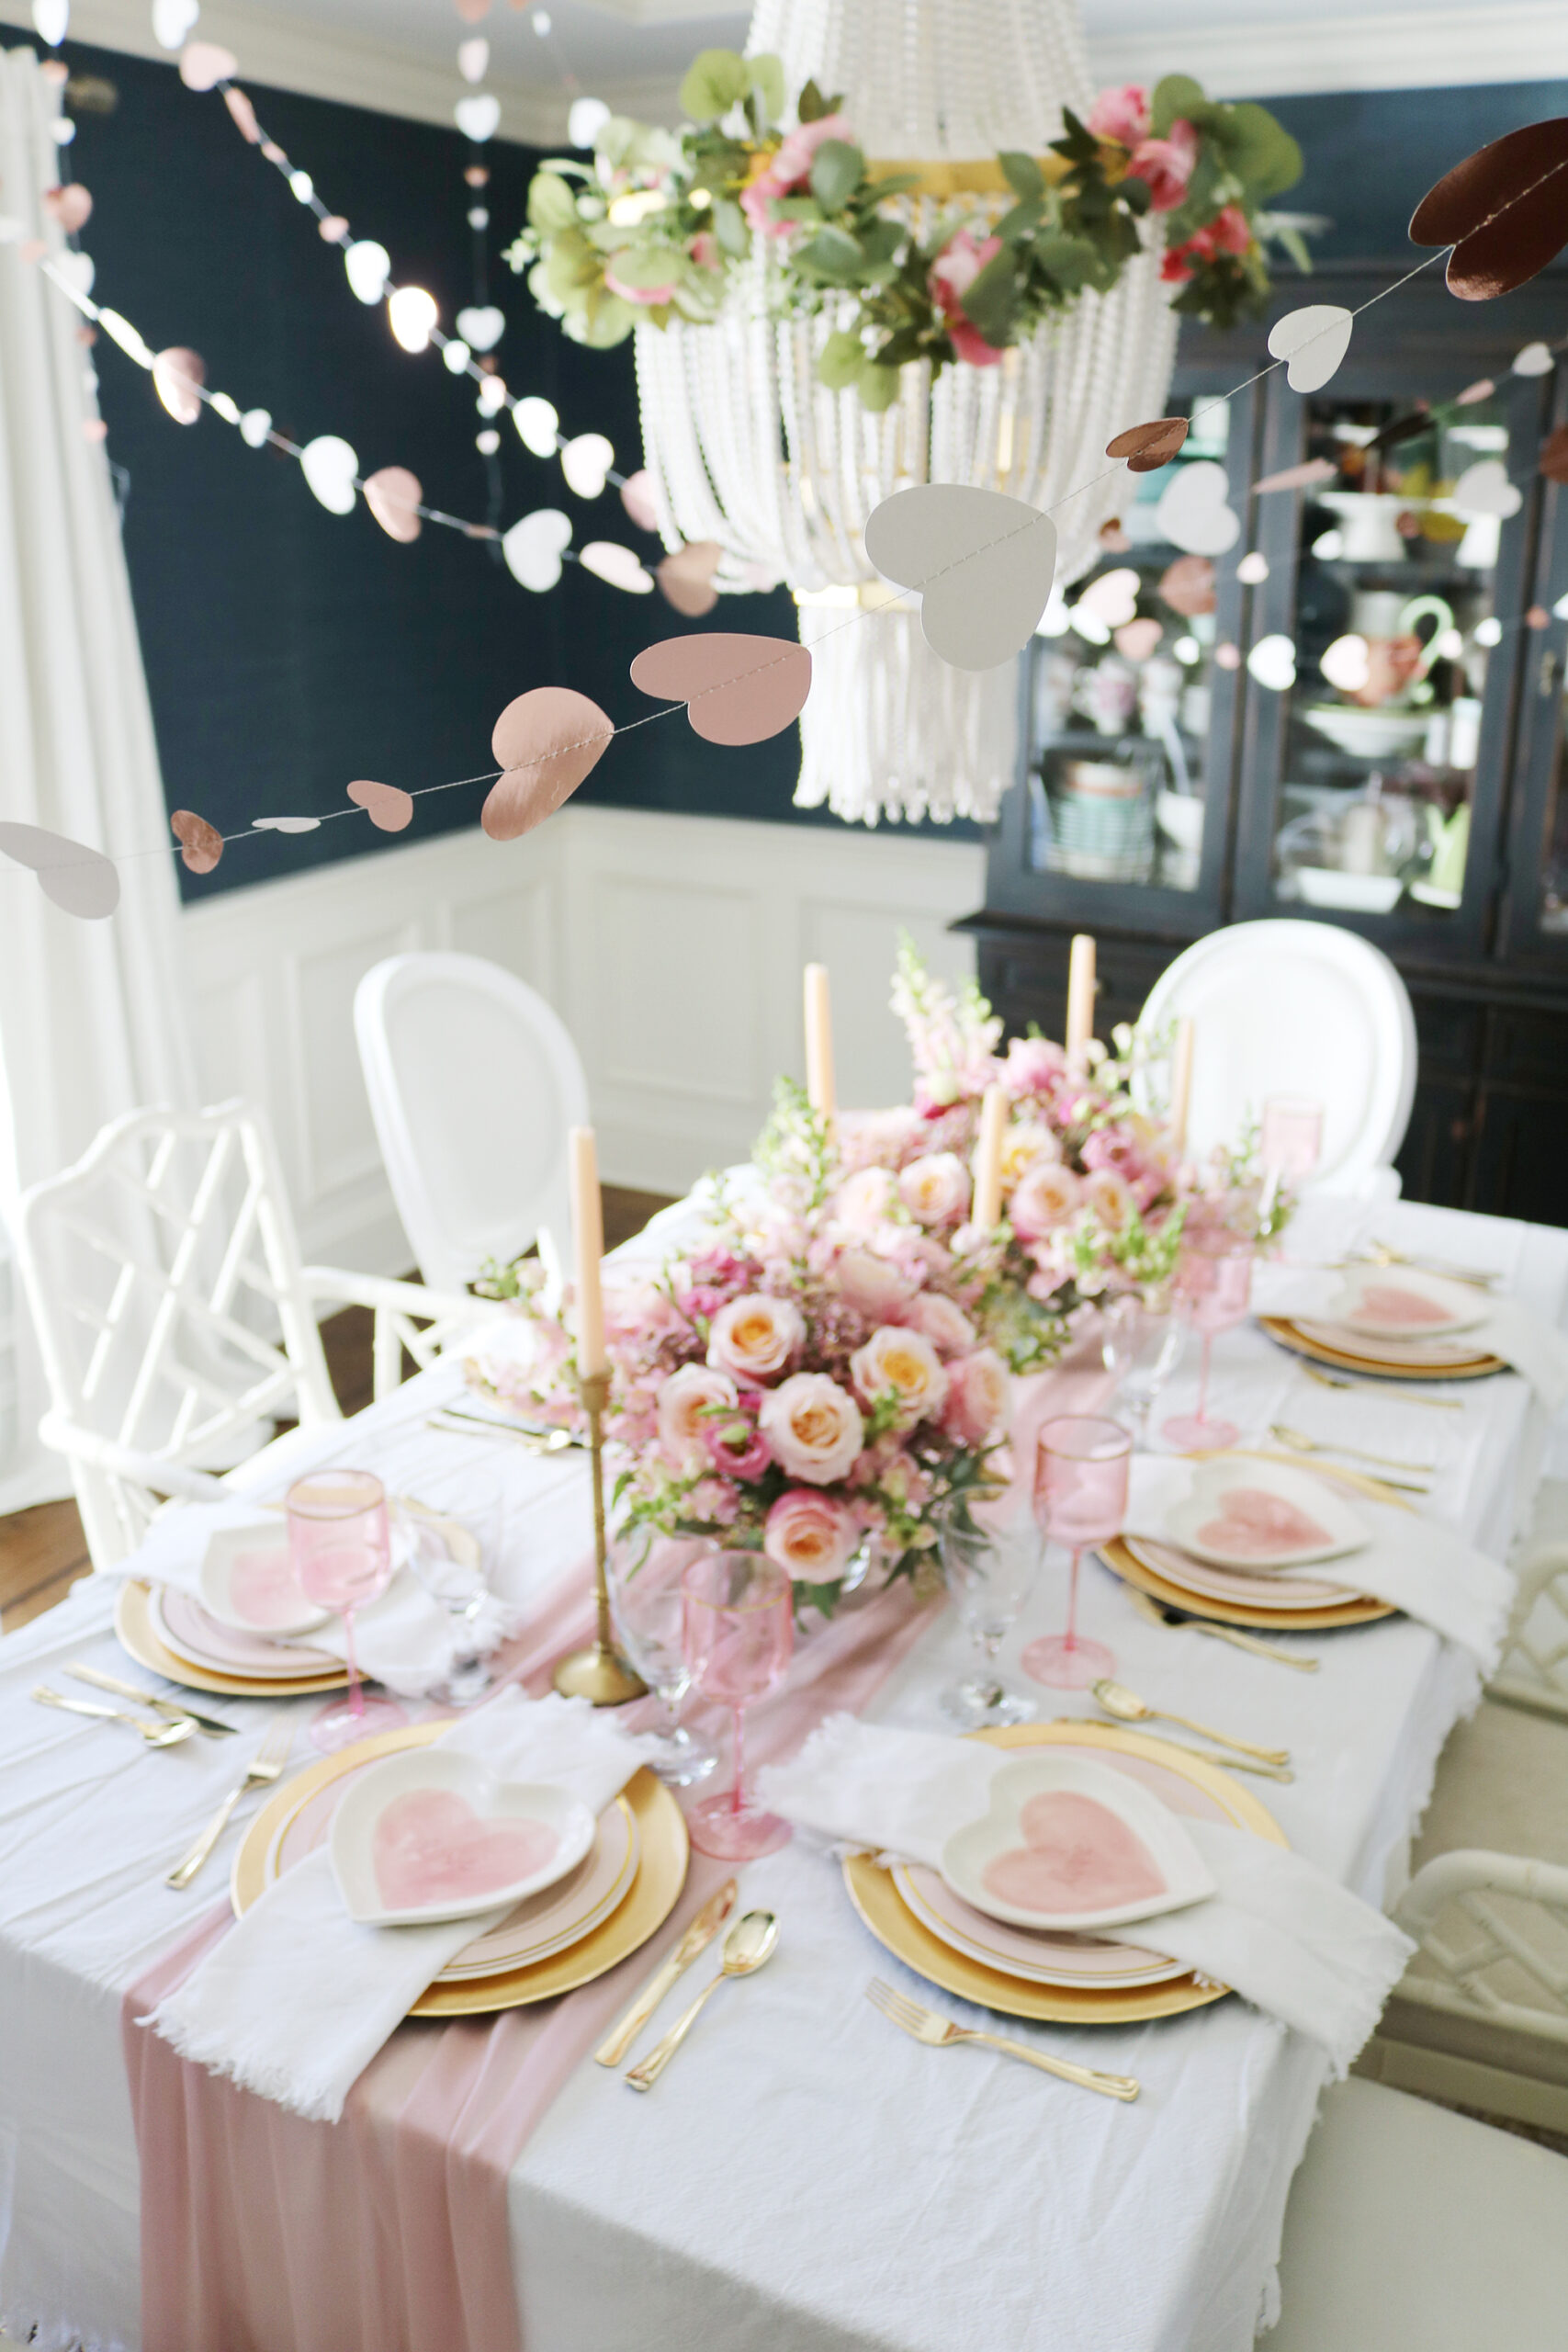 Hearts, Pink Roses and Love Written all Over this Pretty Valentine Tablescape for an intimate dinner celebrating friendships and Valentine's Day. || Darling Darleen TOP Lifestyle Blogger 